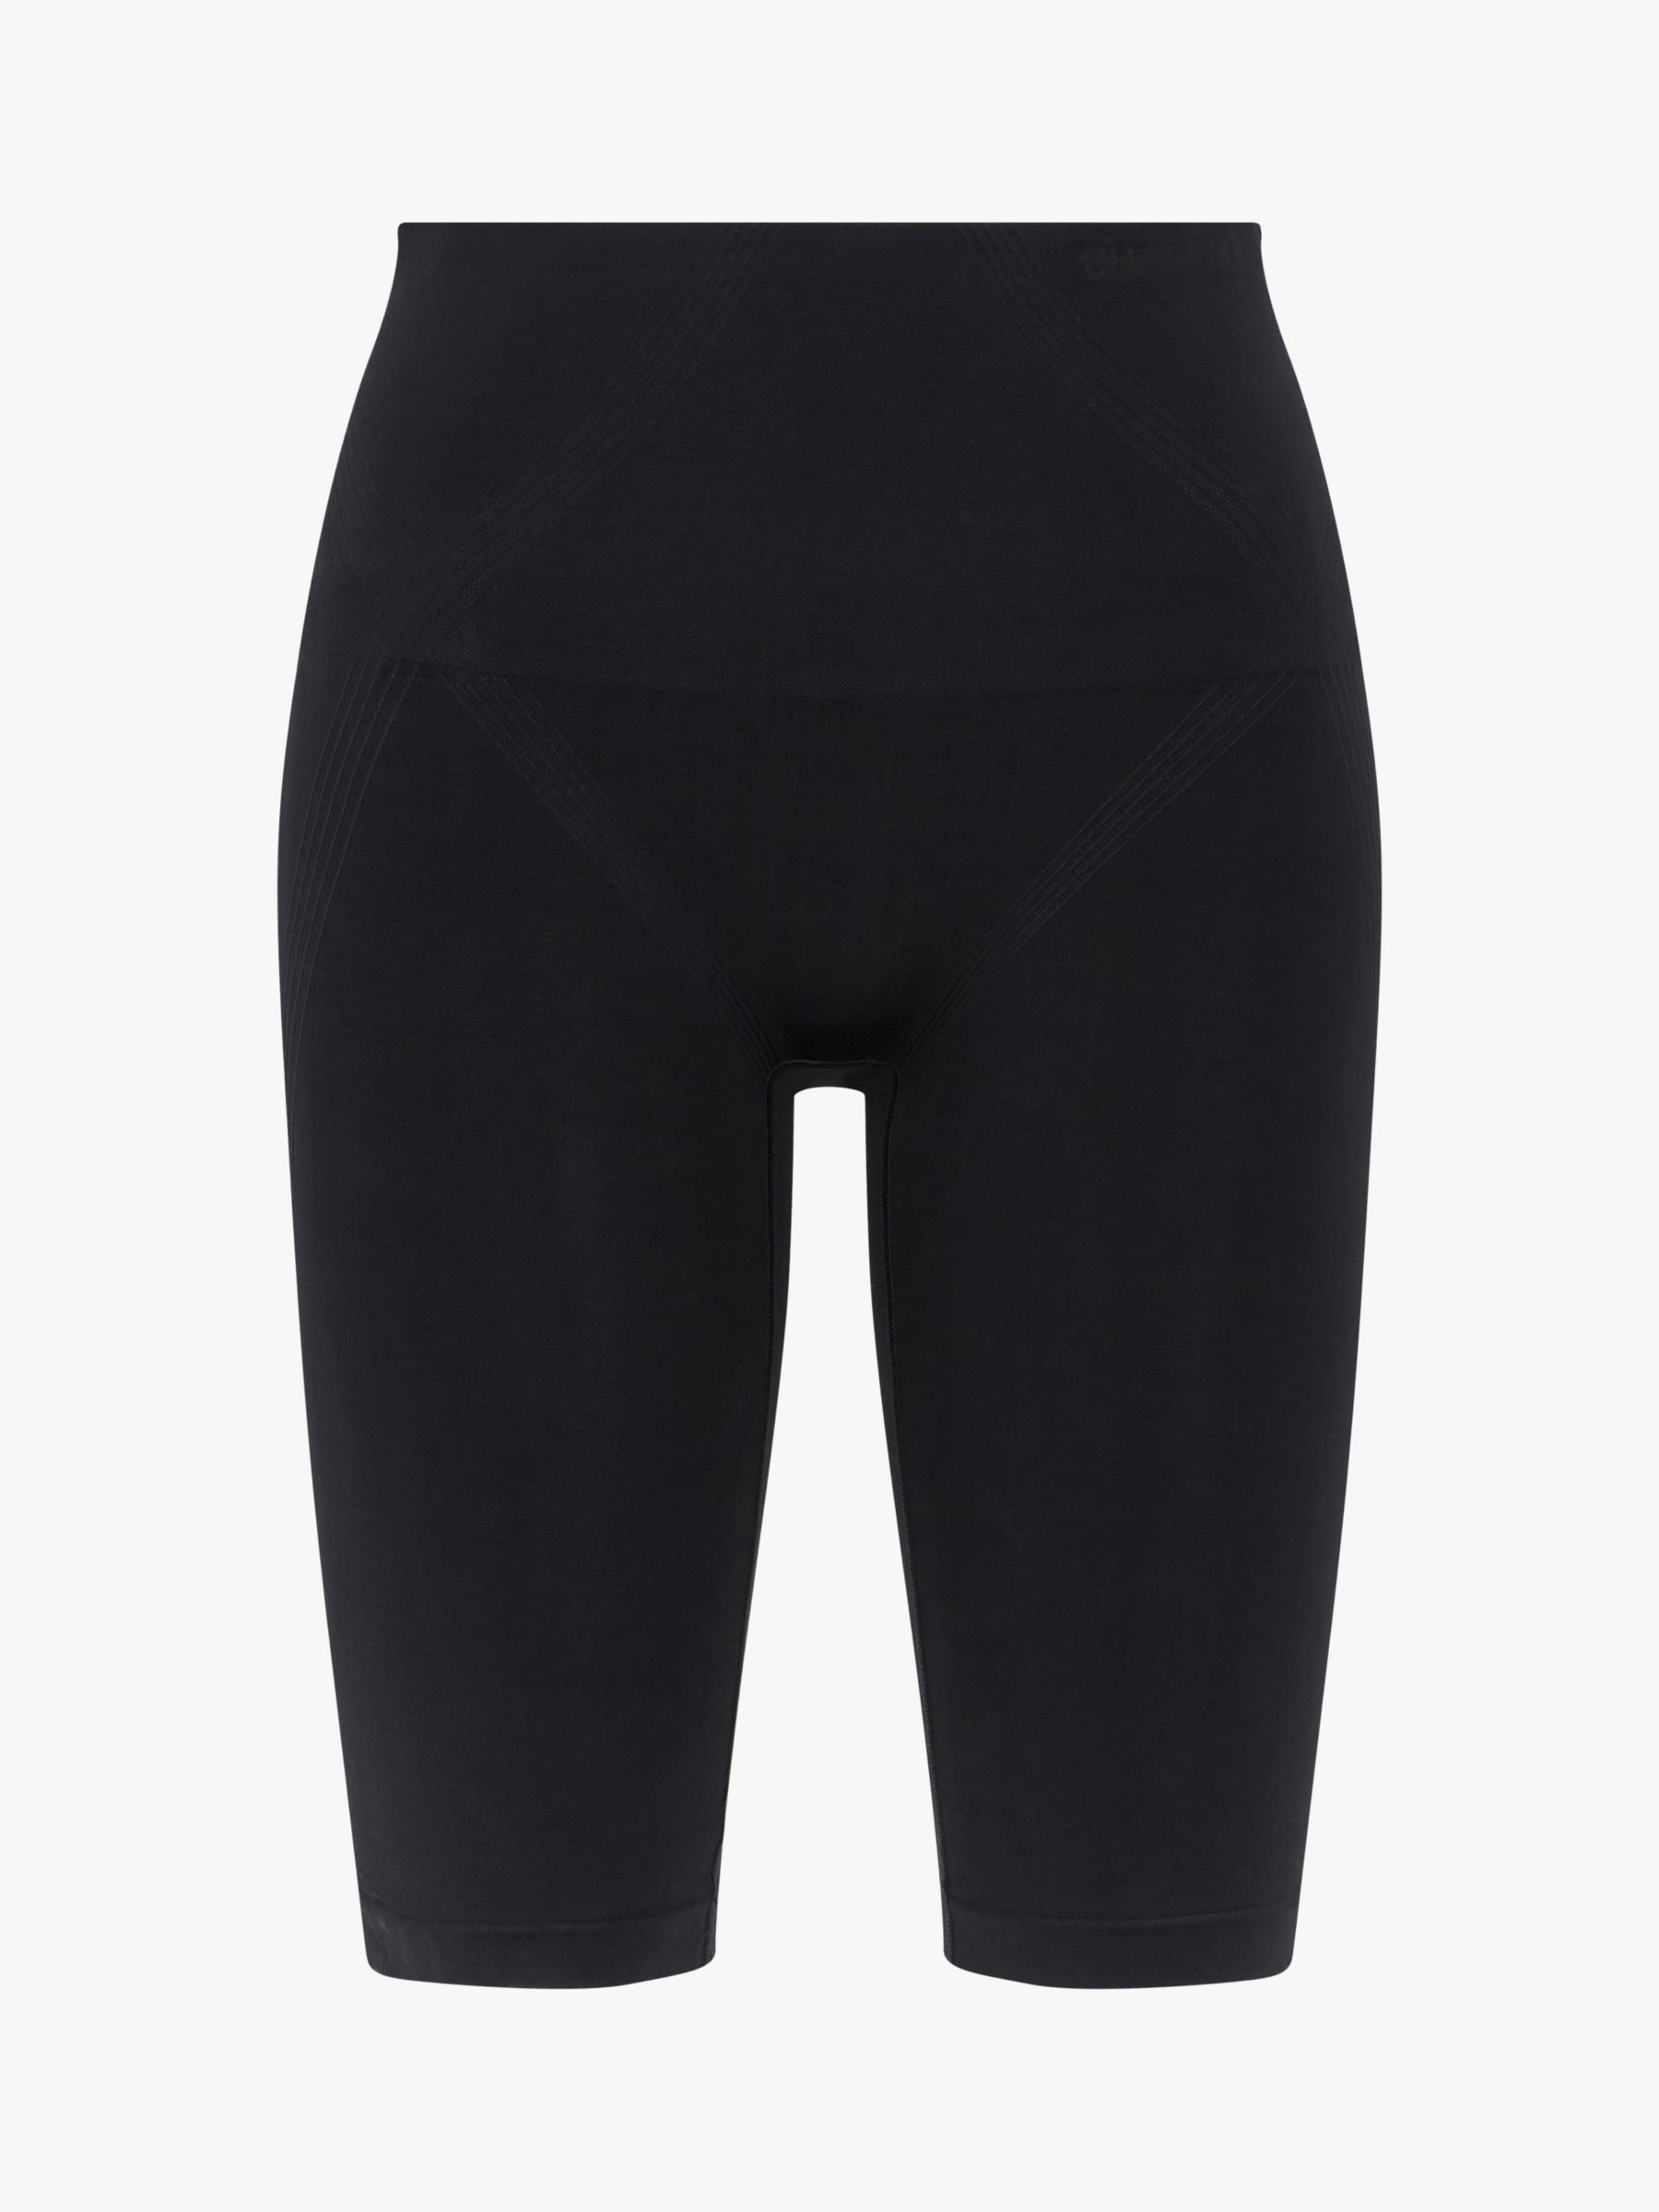 Chantelle Basic Shaping High Waisted Brief, Black at John Lewis & Partners